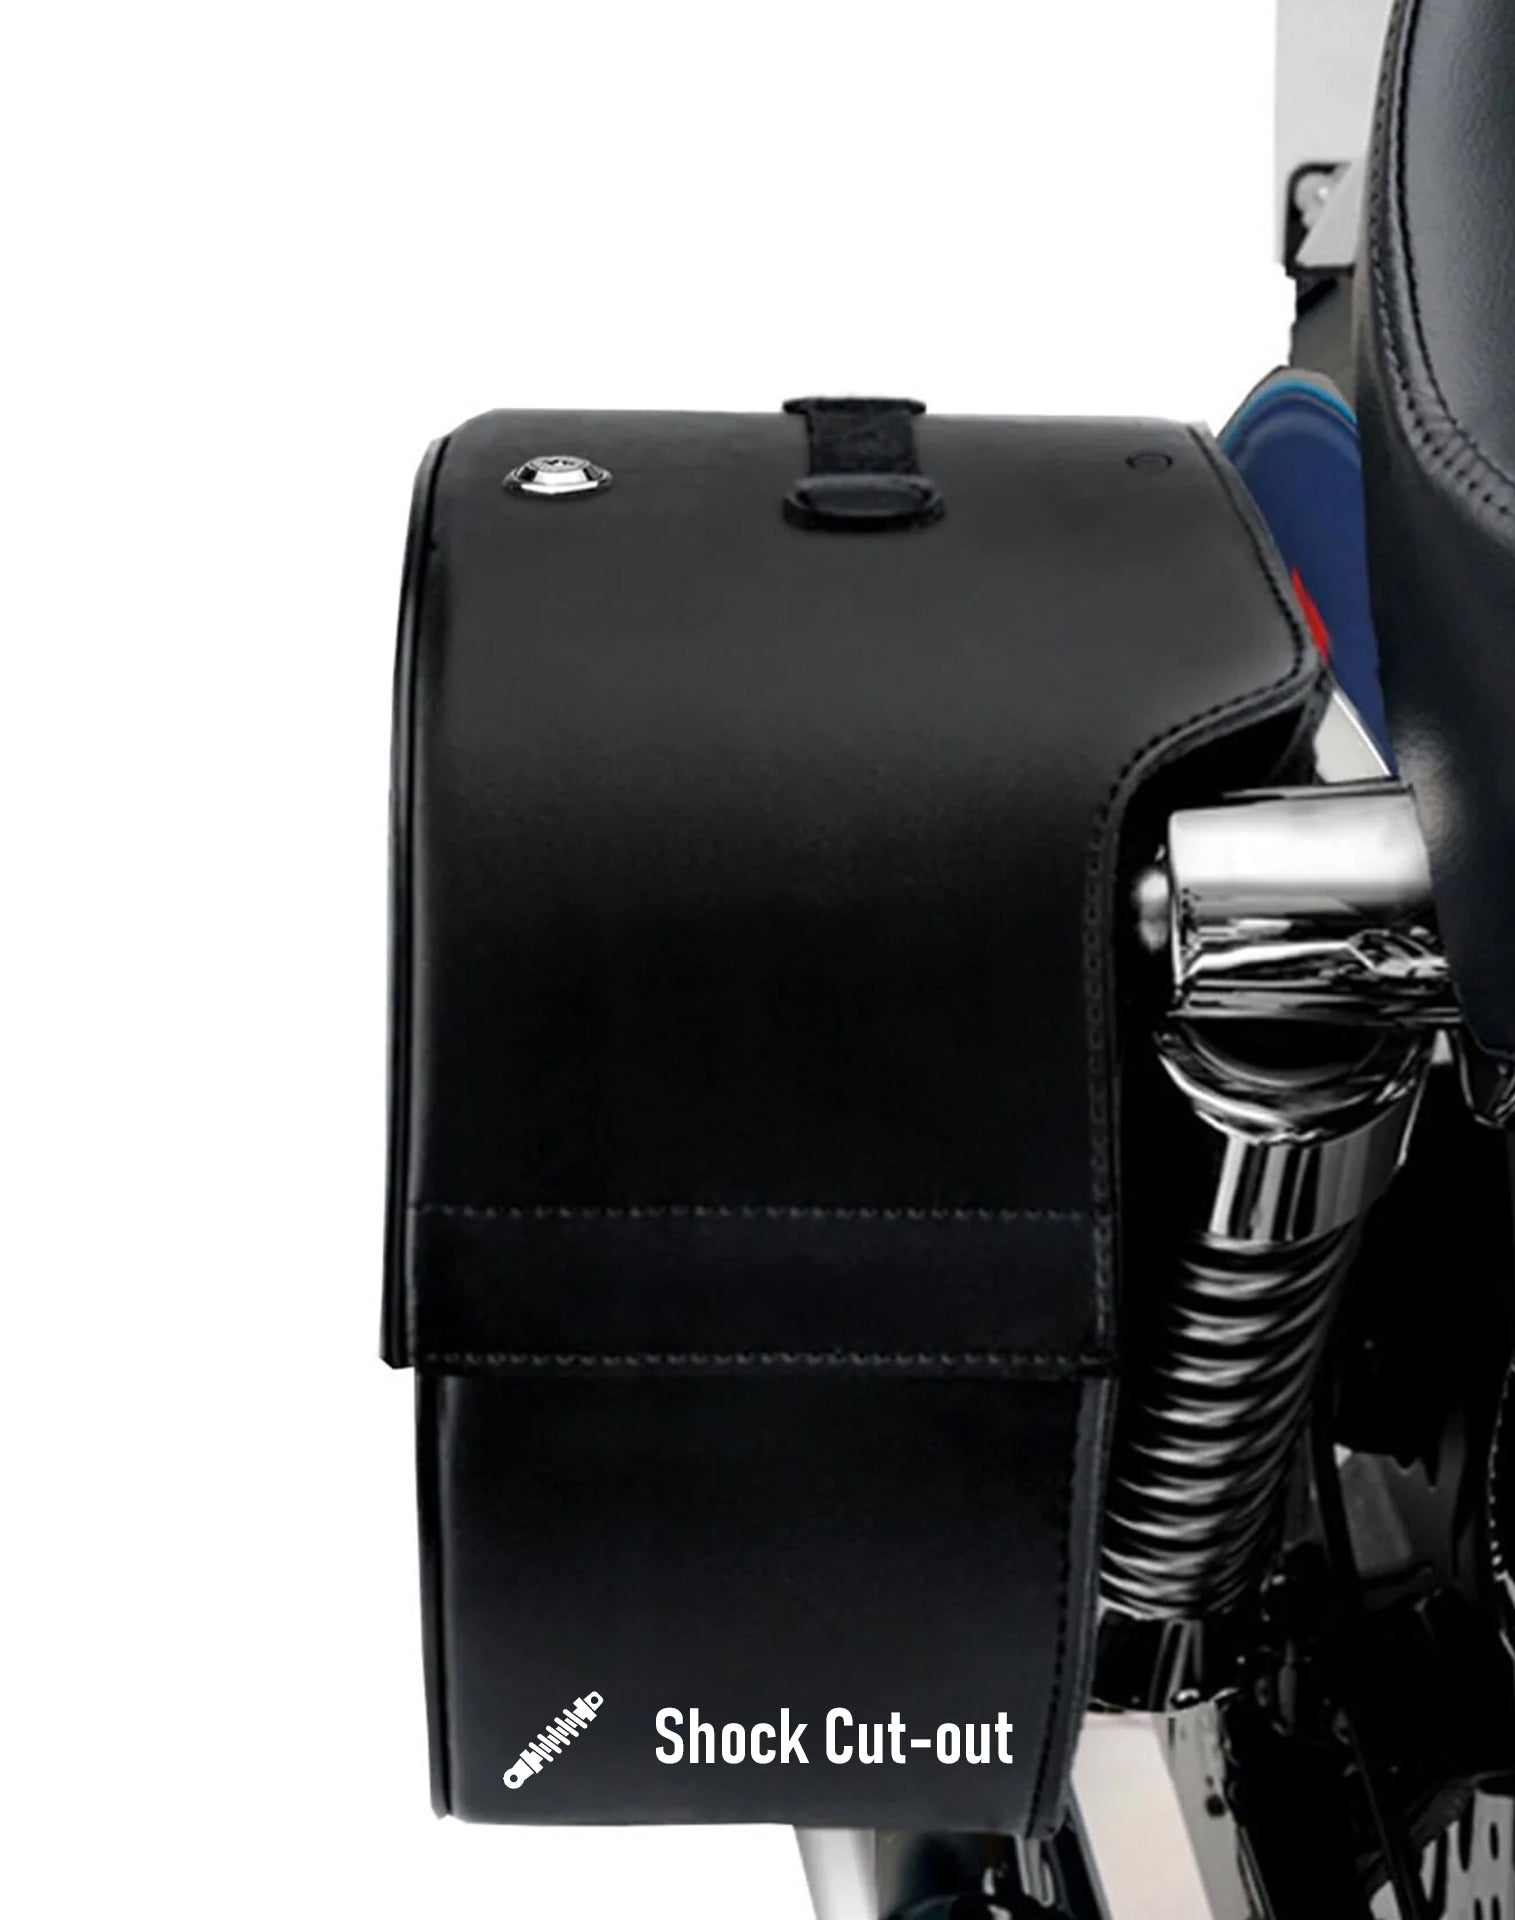 Viking Club Large Kawasaki Vulcan 1500 Classic Vn1500 Shock Cut Out Leather Motorcycle Saddlebags are Durable